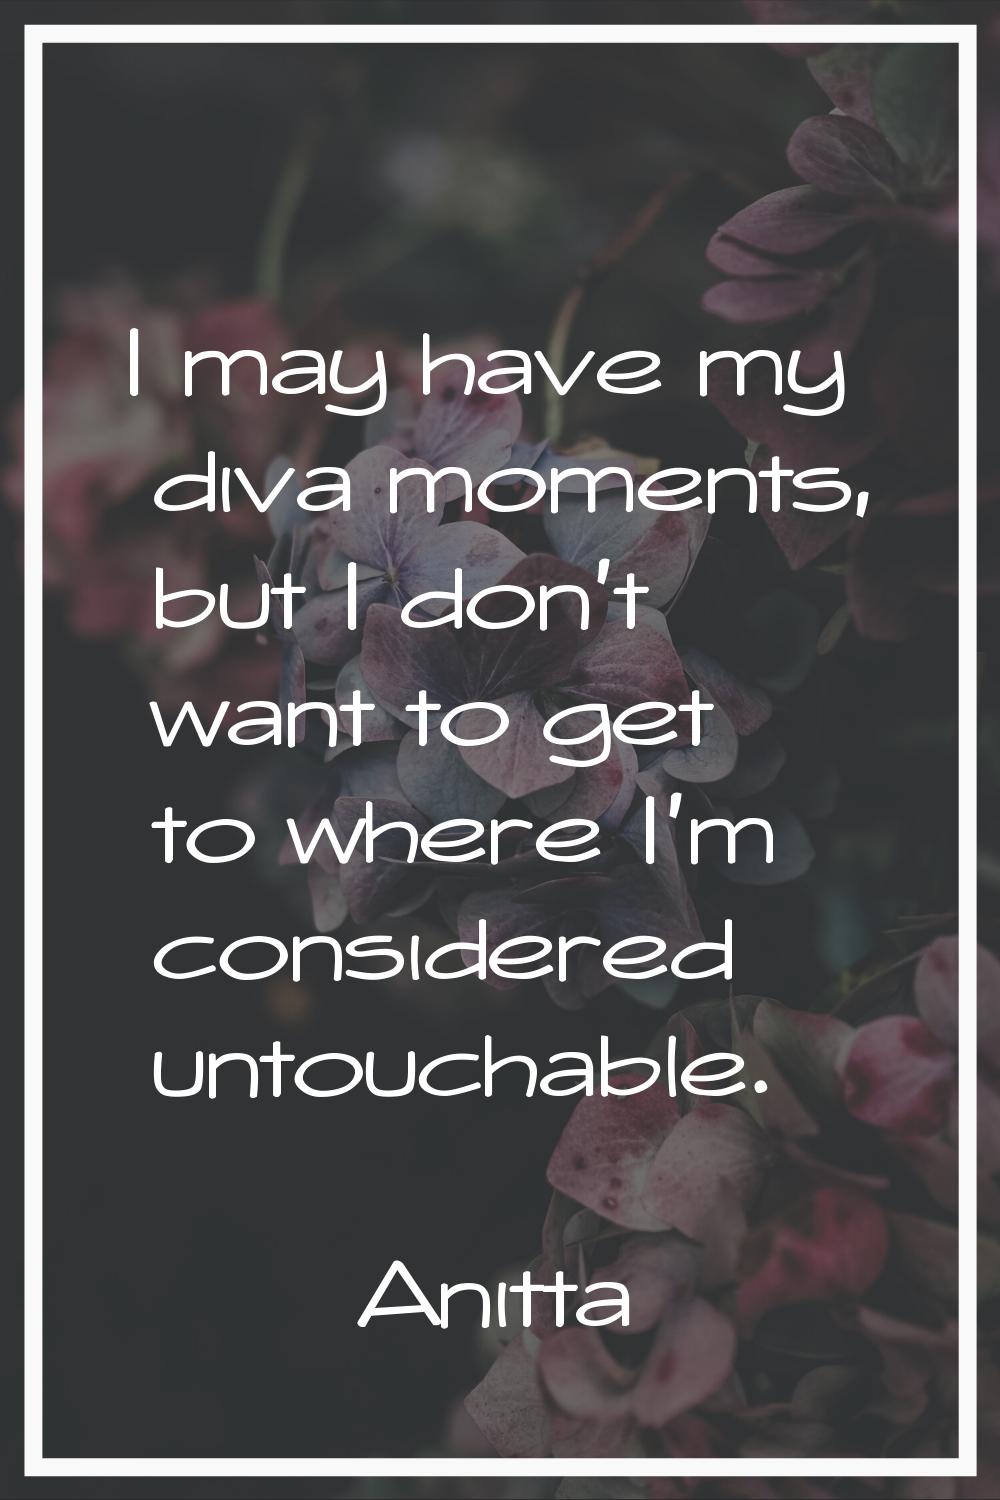 I may have my diva moments, but I don't want to get to where I'm considered untouchable.